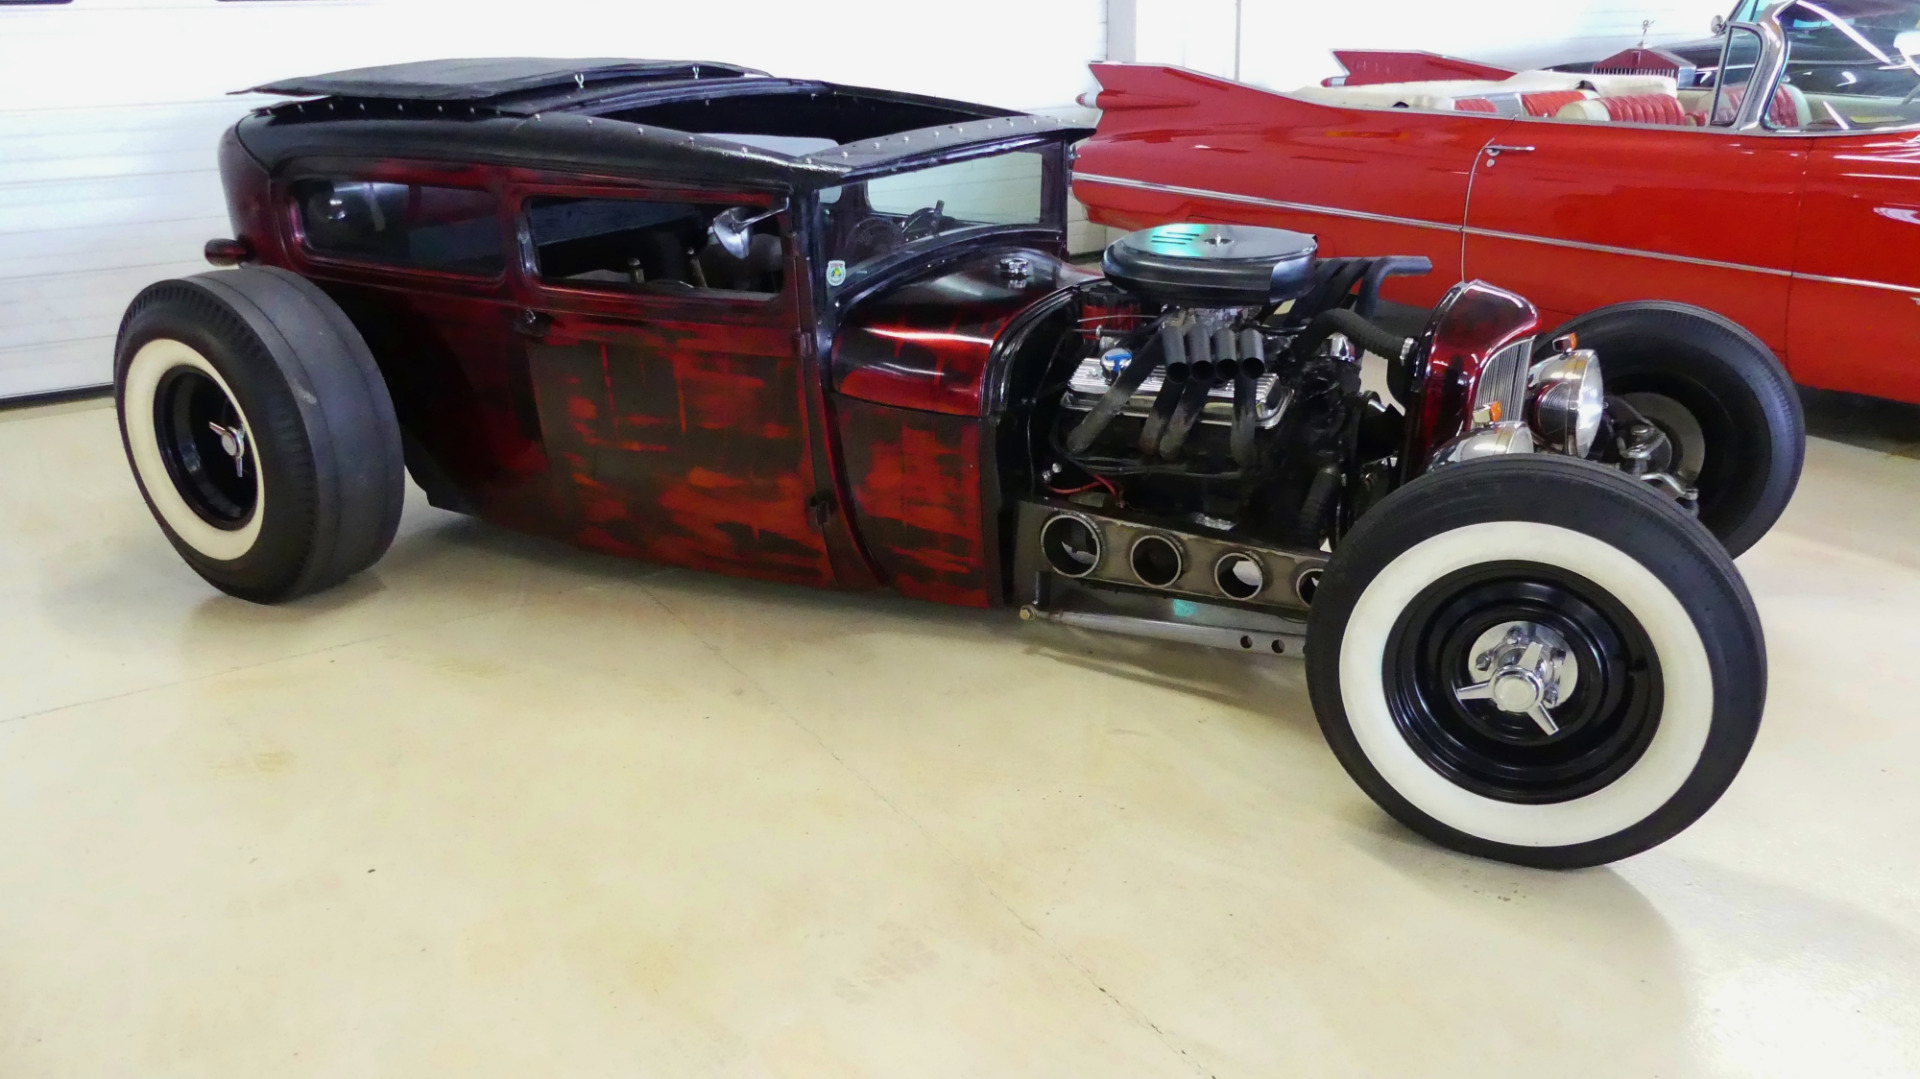 1932 Ford Rat Rod Assembled Vehicle 2 Miles Red 2 DR 350 Automatic.